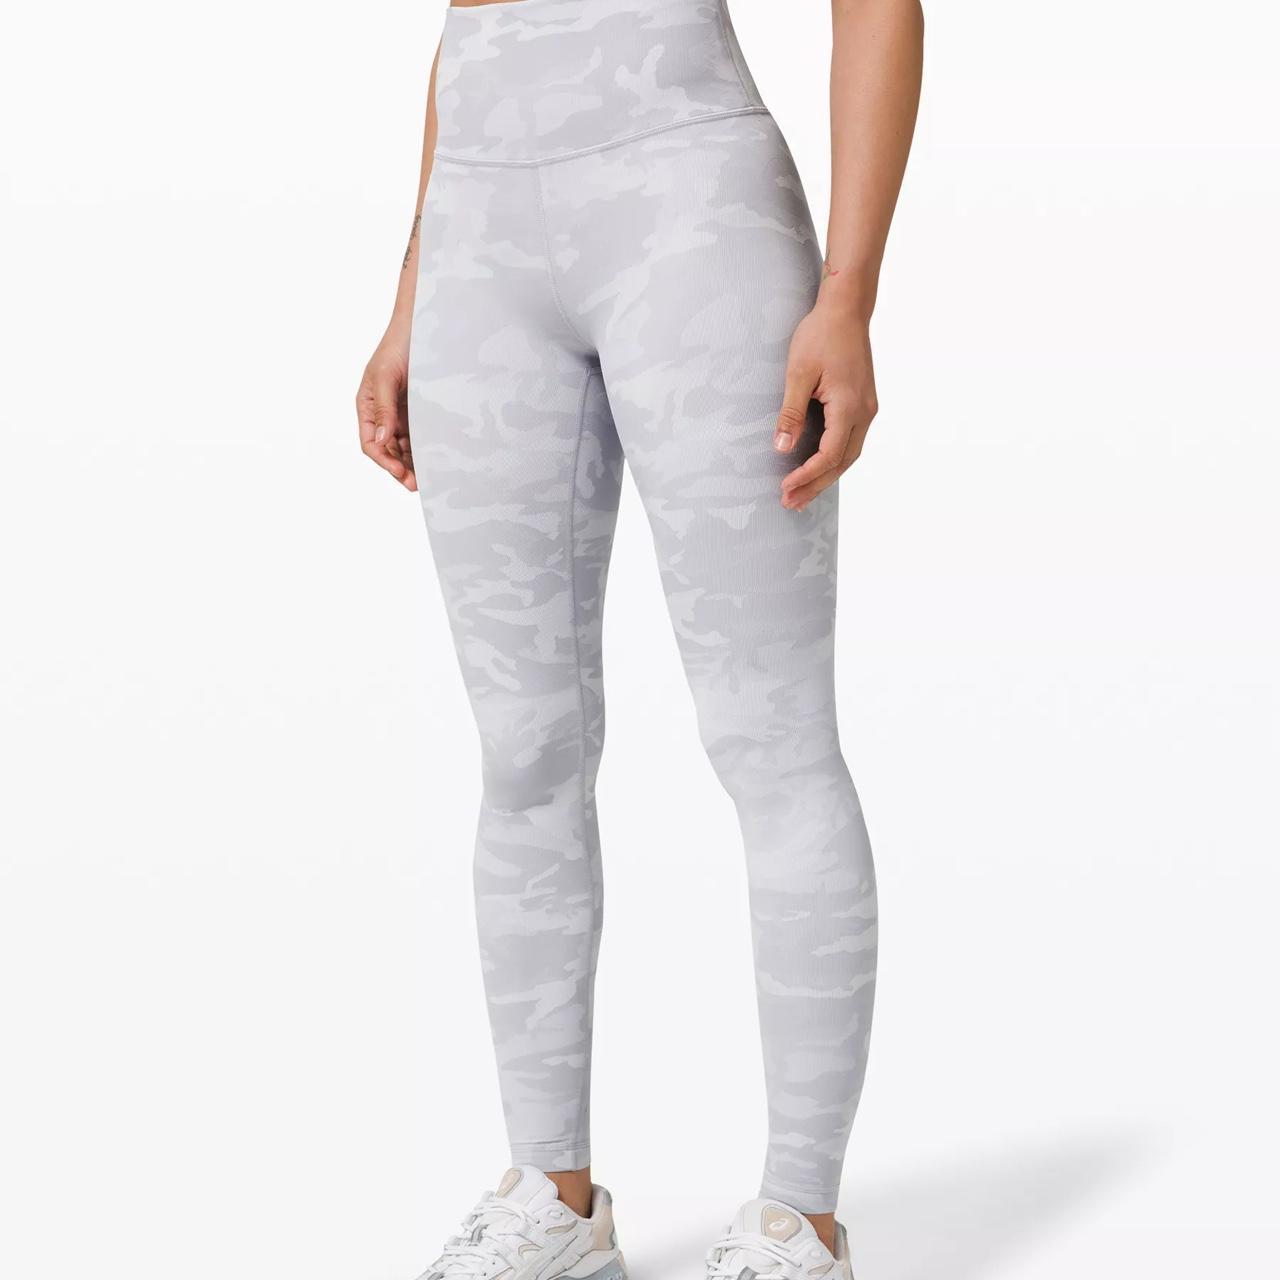 White camo Lululemon wunder unders. So cute they are - Depop